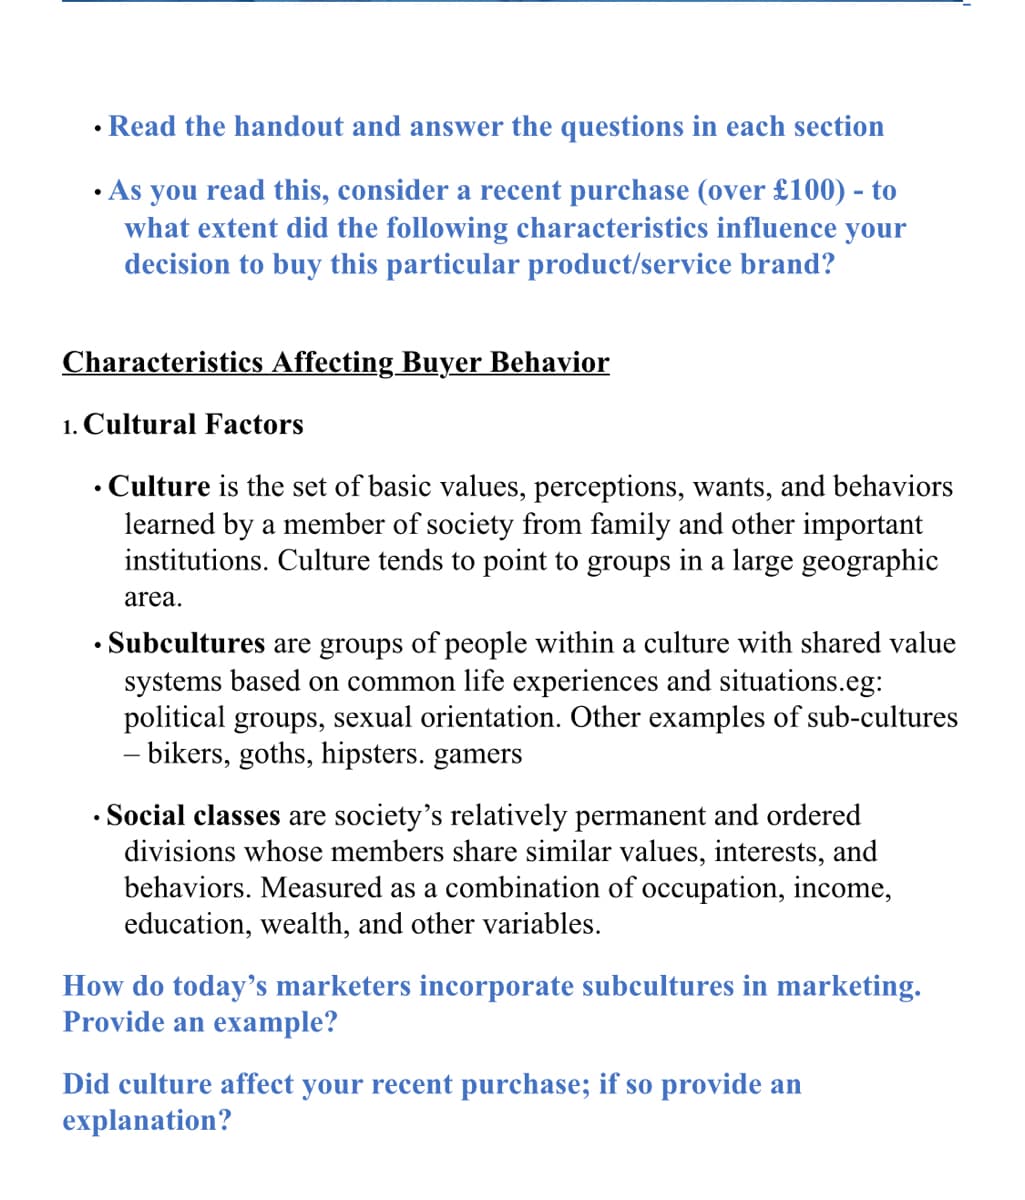 • Read the handout and answer the questions in each section
• As you read this, consider a recent purchase (over £100) - to
what extent did the following characteristics influence your
decision to buy this particular product/service brand?
Characteristics Affecting Buyer Behavior
1. Cultural Factors
• Culture is the set of basic values, perceptions, wants, and behaviors
learned by a member of society from family and other important
institutions. Culture tends to point to groups in a large geographic
area.
• Subcultures are groups of people within a culture with shared value
systems based on common life experiences and situations.eg:
political groups, sexual orientation. Other examples of sub-cultures
- bikers, goths, hipsters. gamers
• Social classes are society's relatively permanent and ordered
divisions whose members share similar values, interests, and
behaviors. Measured as a combination of occupation, income,
education, wealth, and other variables.
How do today's marketers incorporate subcultures in marketing.
Provide an example?
Did culture affect your recent purchase; if so provide an
explanation?
